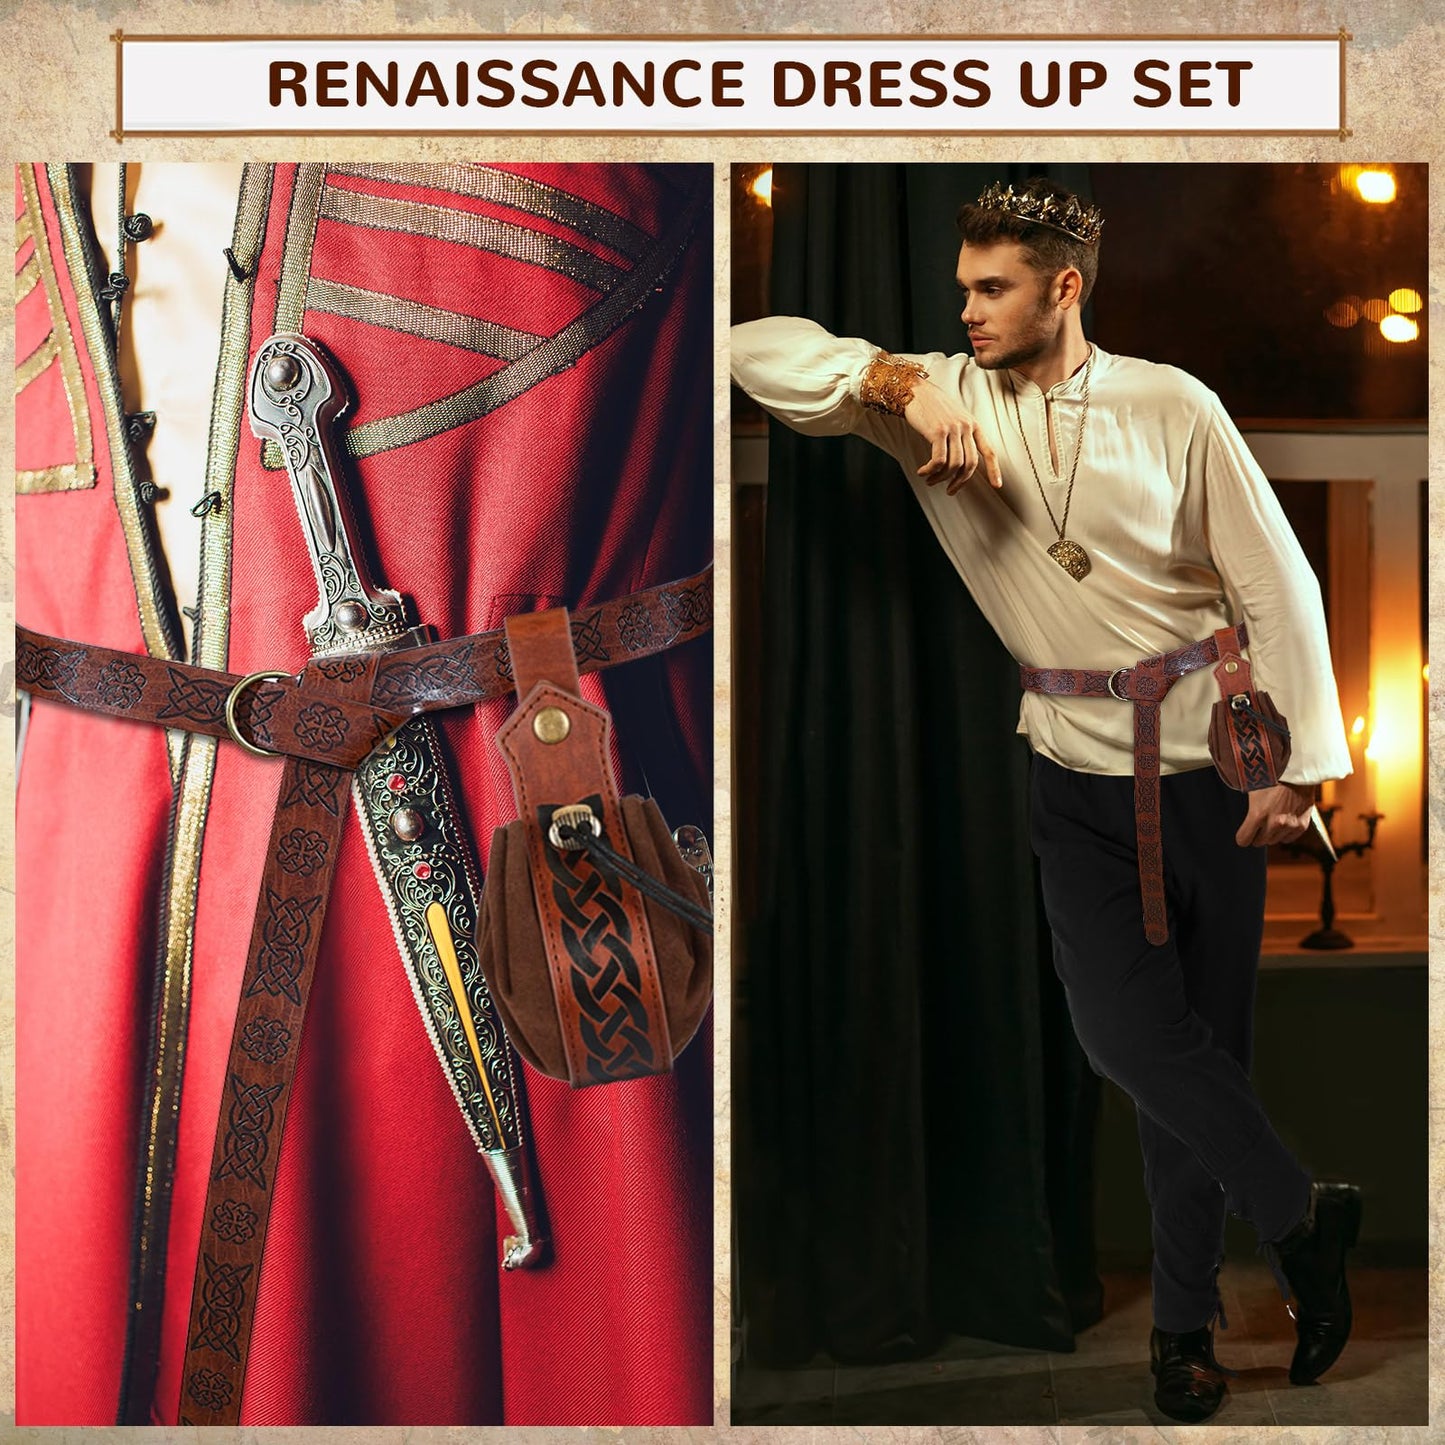 Xtinmee 4 Pcs Halloween Medieval Viking Costume Include Lace up Long Sleeve Shirts Cuff Renaissance Pants Leather Belt Pouch Beige, Brown, Coffee Large